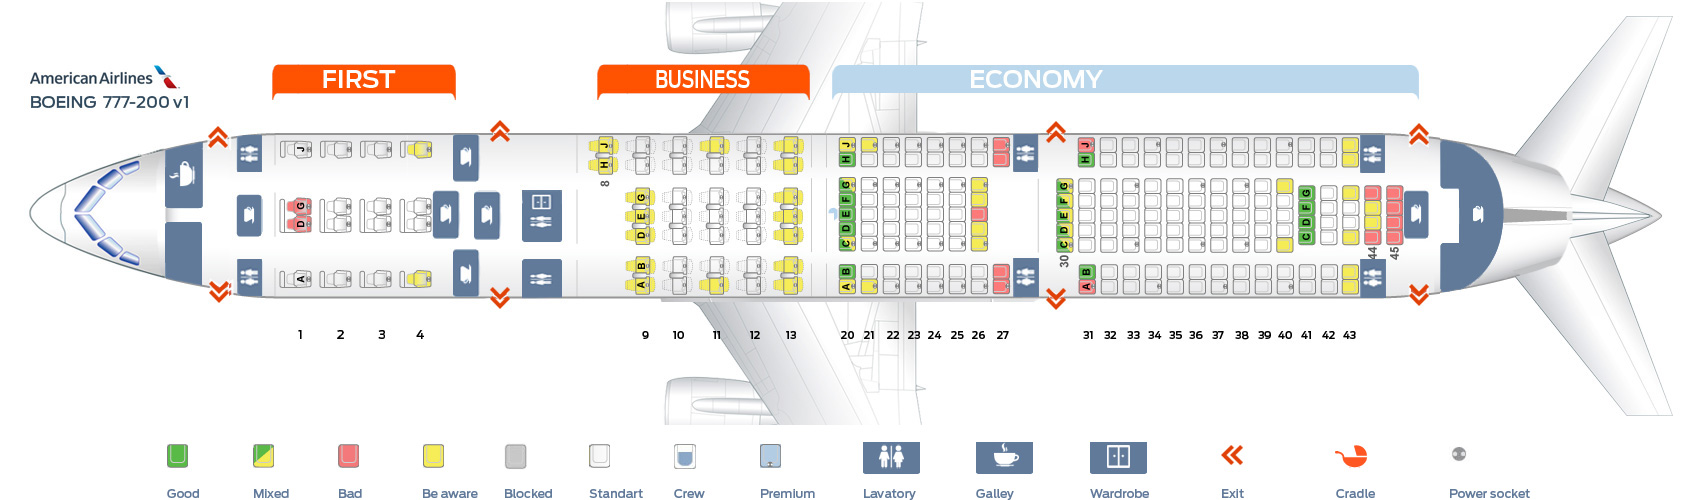 American Airlines Seating Chart 777 200